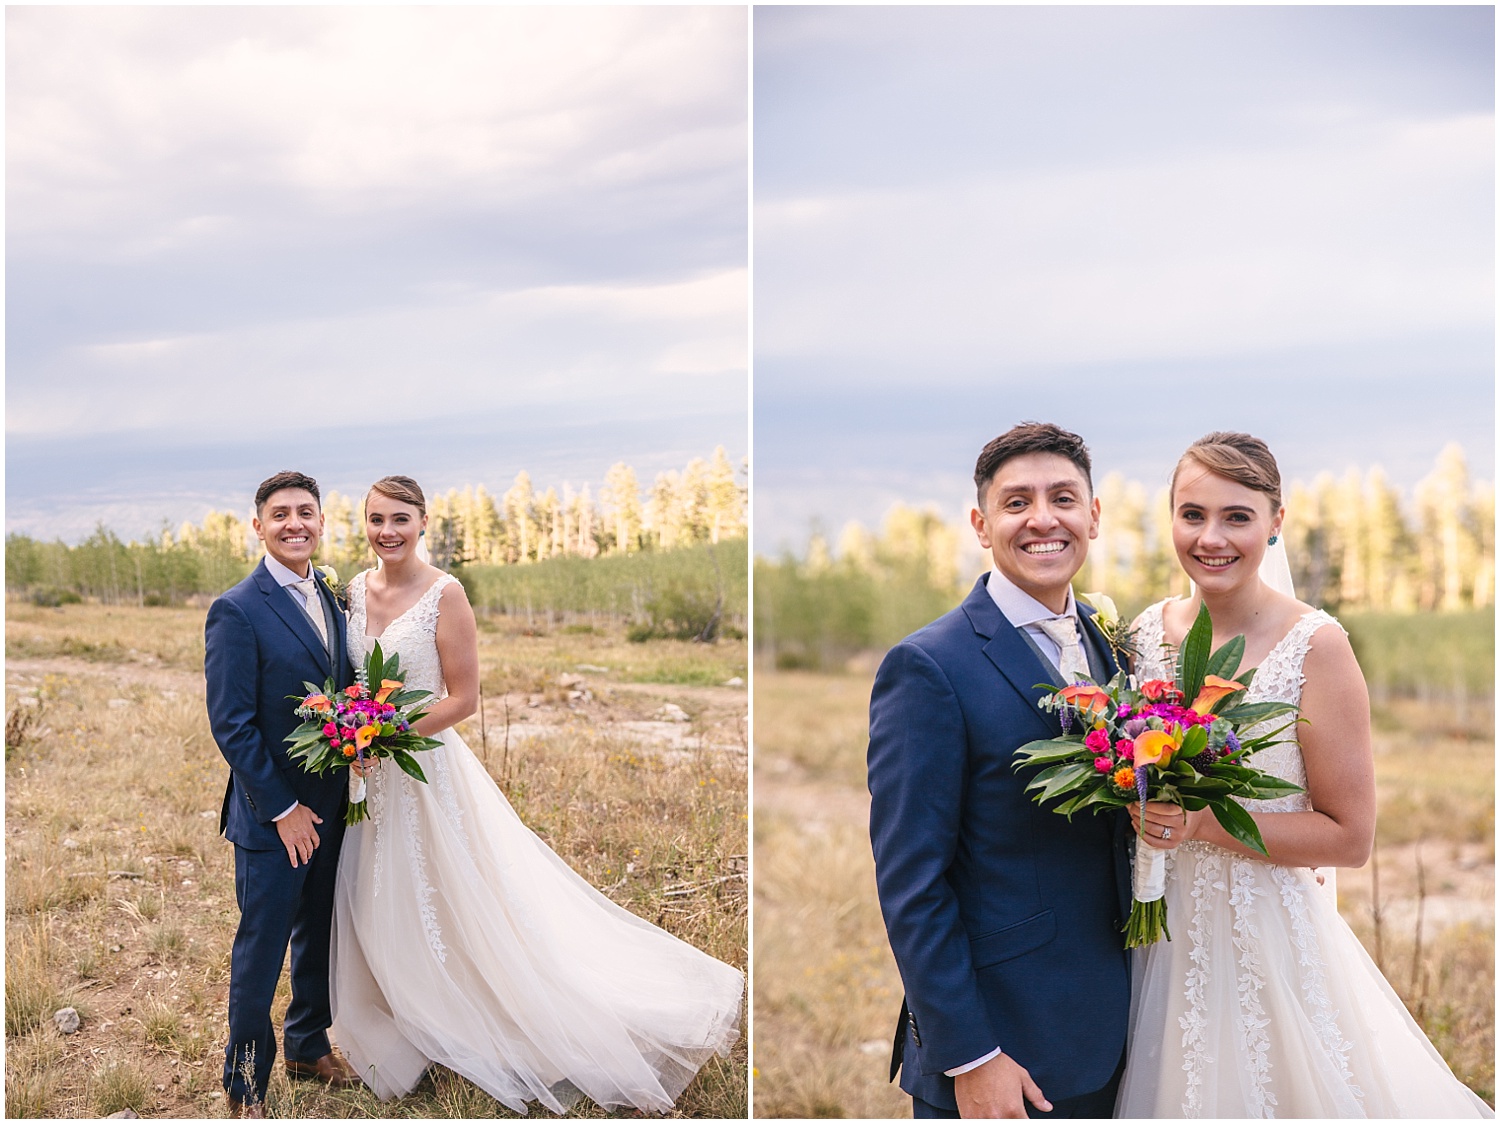 Bride and groom's portraits at 10k trailhead in Sandia Mountains